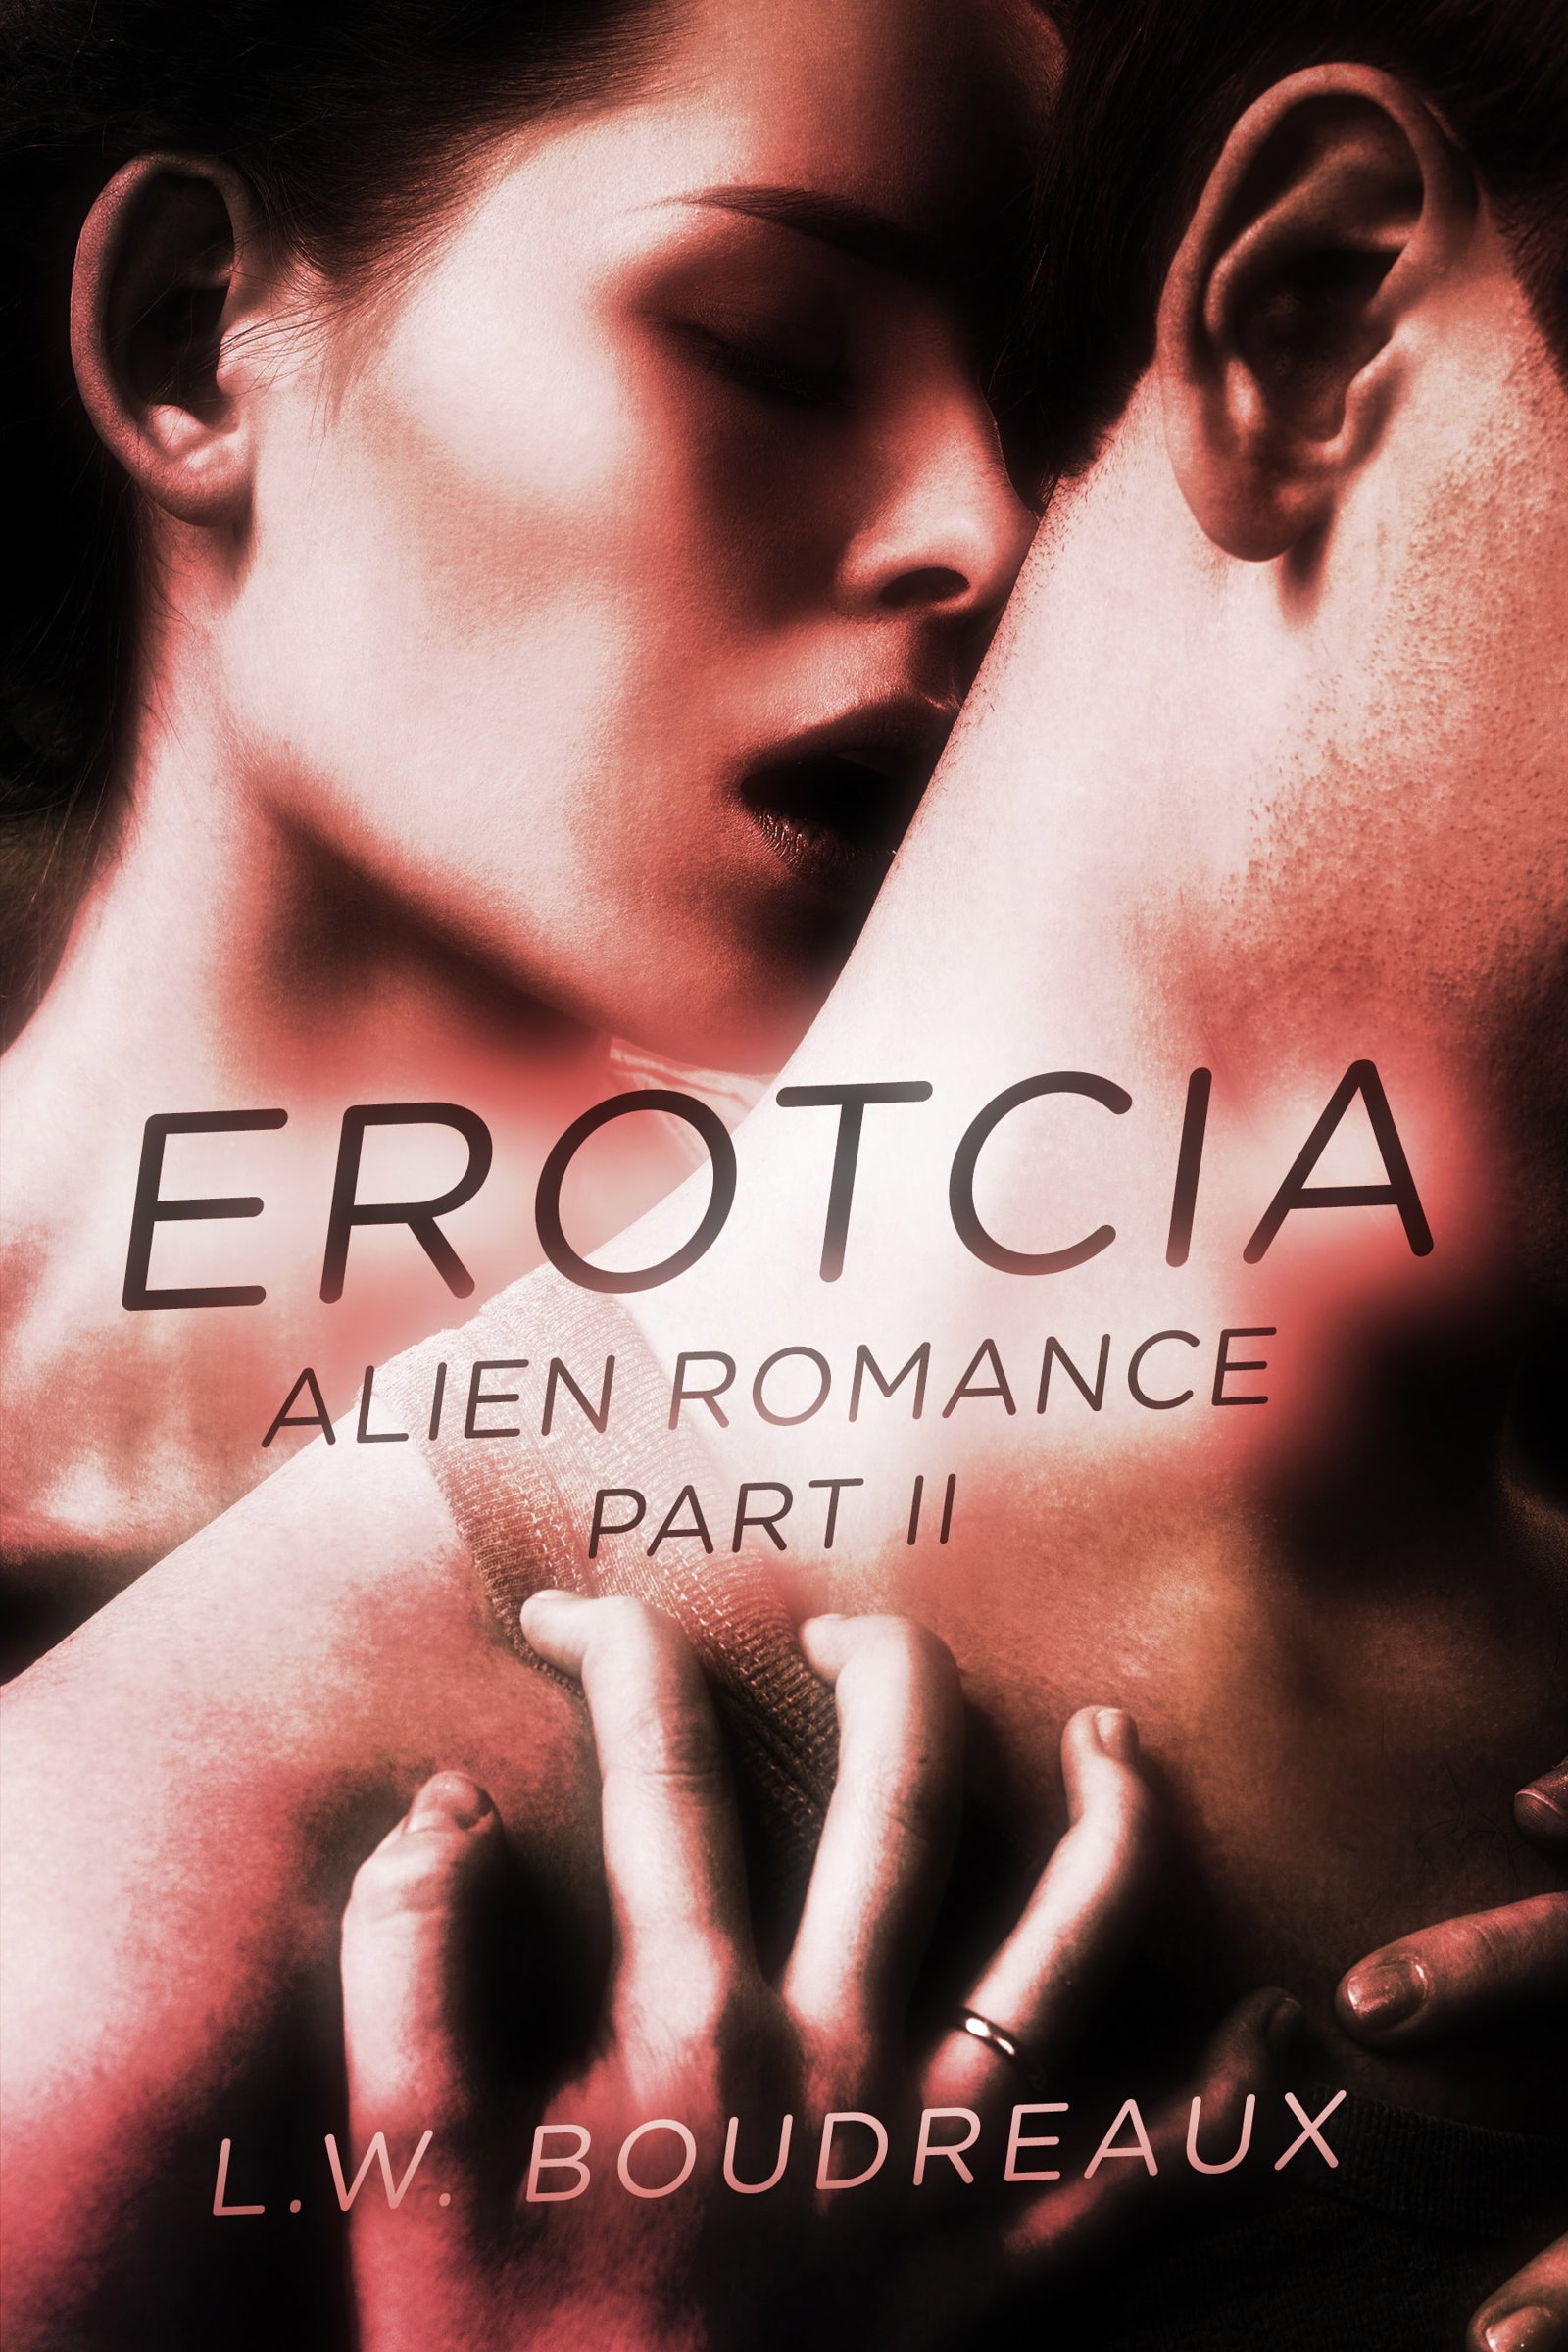 Photo by erotcia with the username @erotcia, who is a verified user,  June 29, 2020 at 4:00 AM. The post is about the topic Erotcia: Erotica books by LW Boudreaux and the text says '“It’s quite alright. Let’s just go back before you arrived here in our system. What brought you here?”

“We were... uh... flying... and we saw a black hole.”

“Black holes are monstrous. How did you come to be in the vicinity of a black hole?”

“It was..'